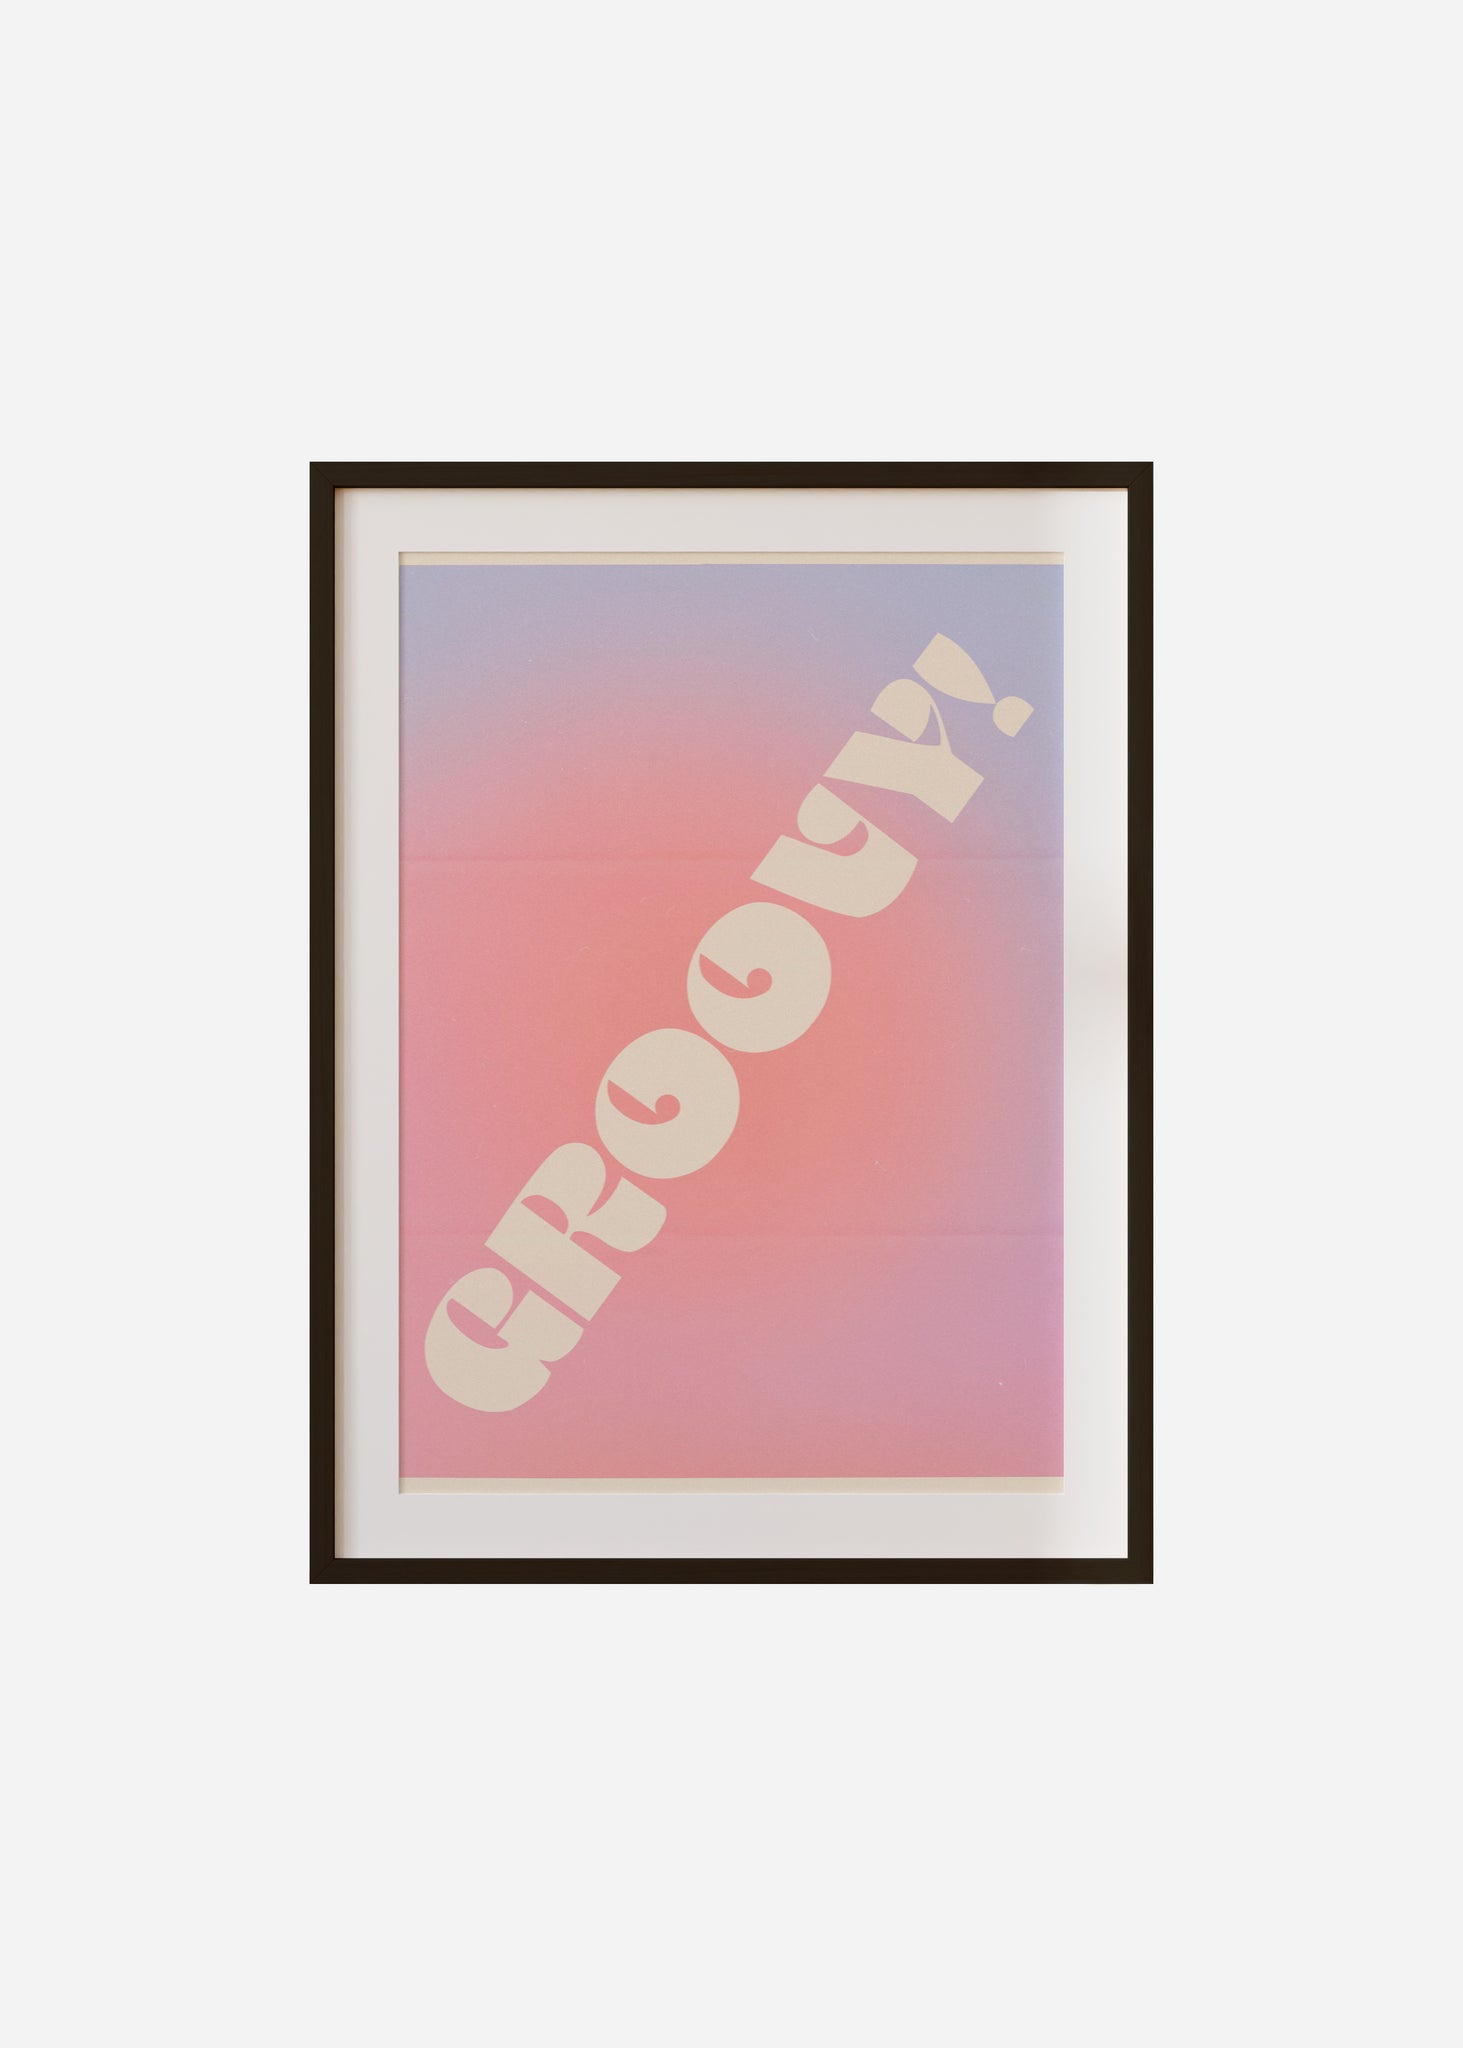 groovy Framed & Mounted Print